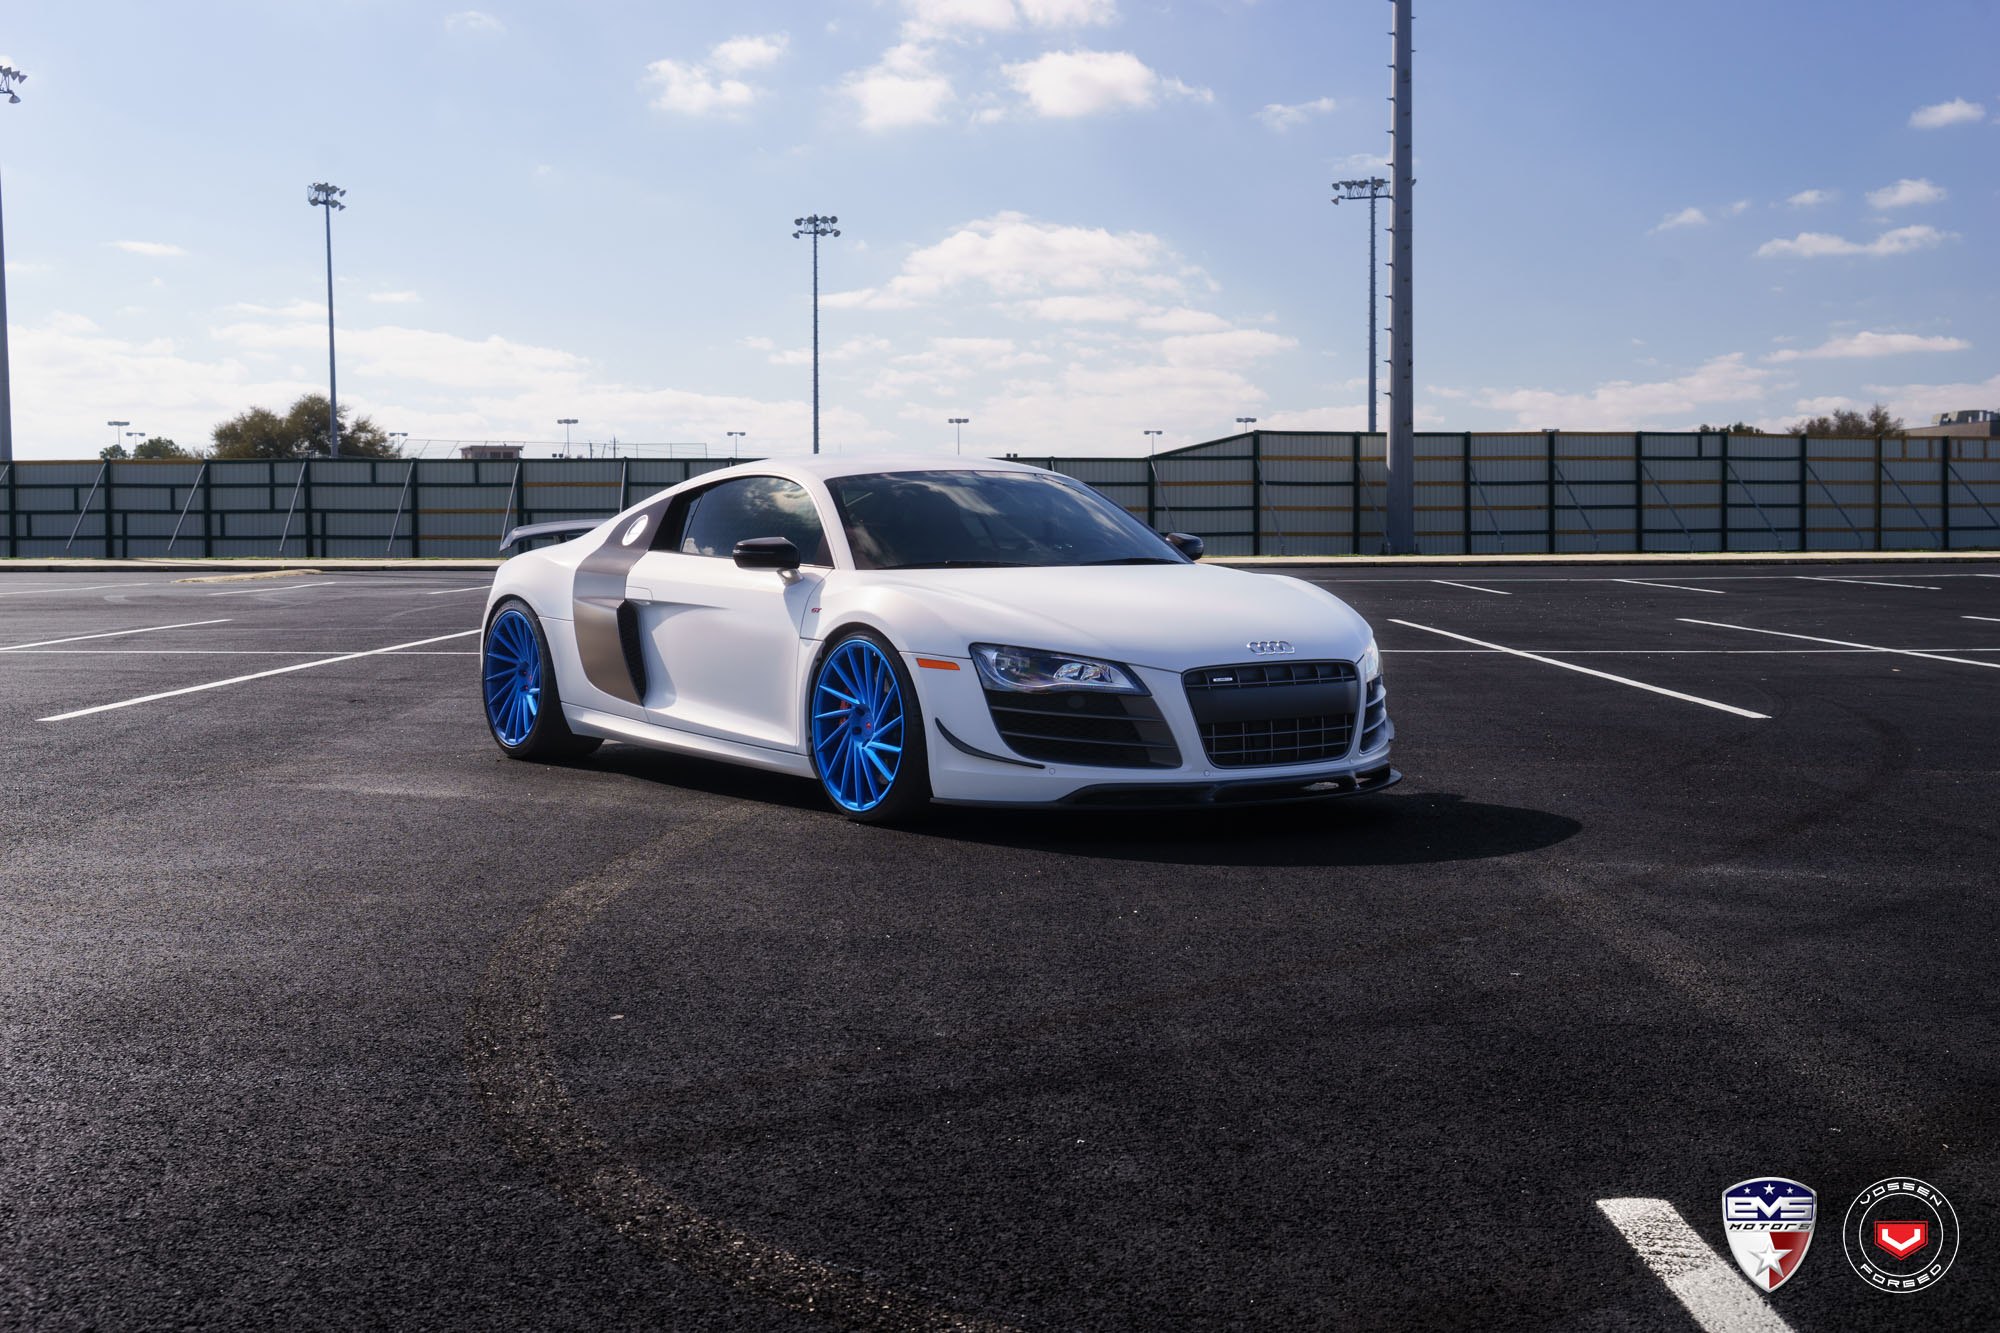 Contrast is Everything - Diamond White R8 on Electric Blue Custom Wheels - Photo by Vossen